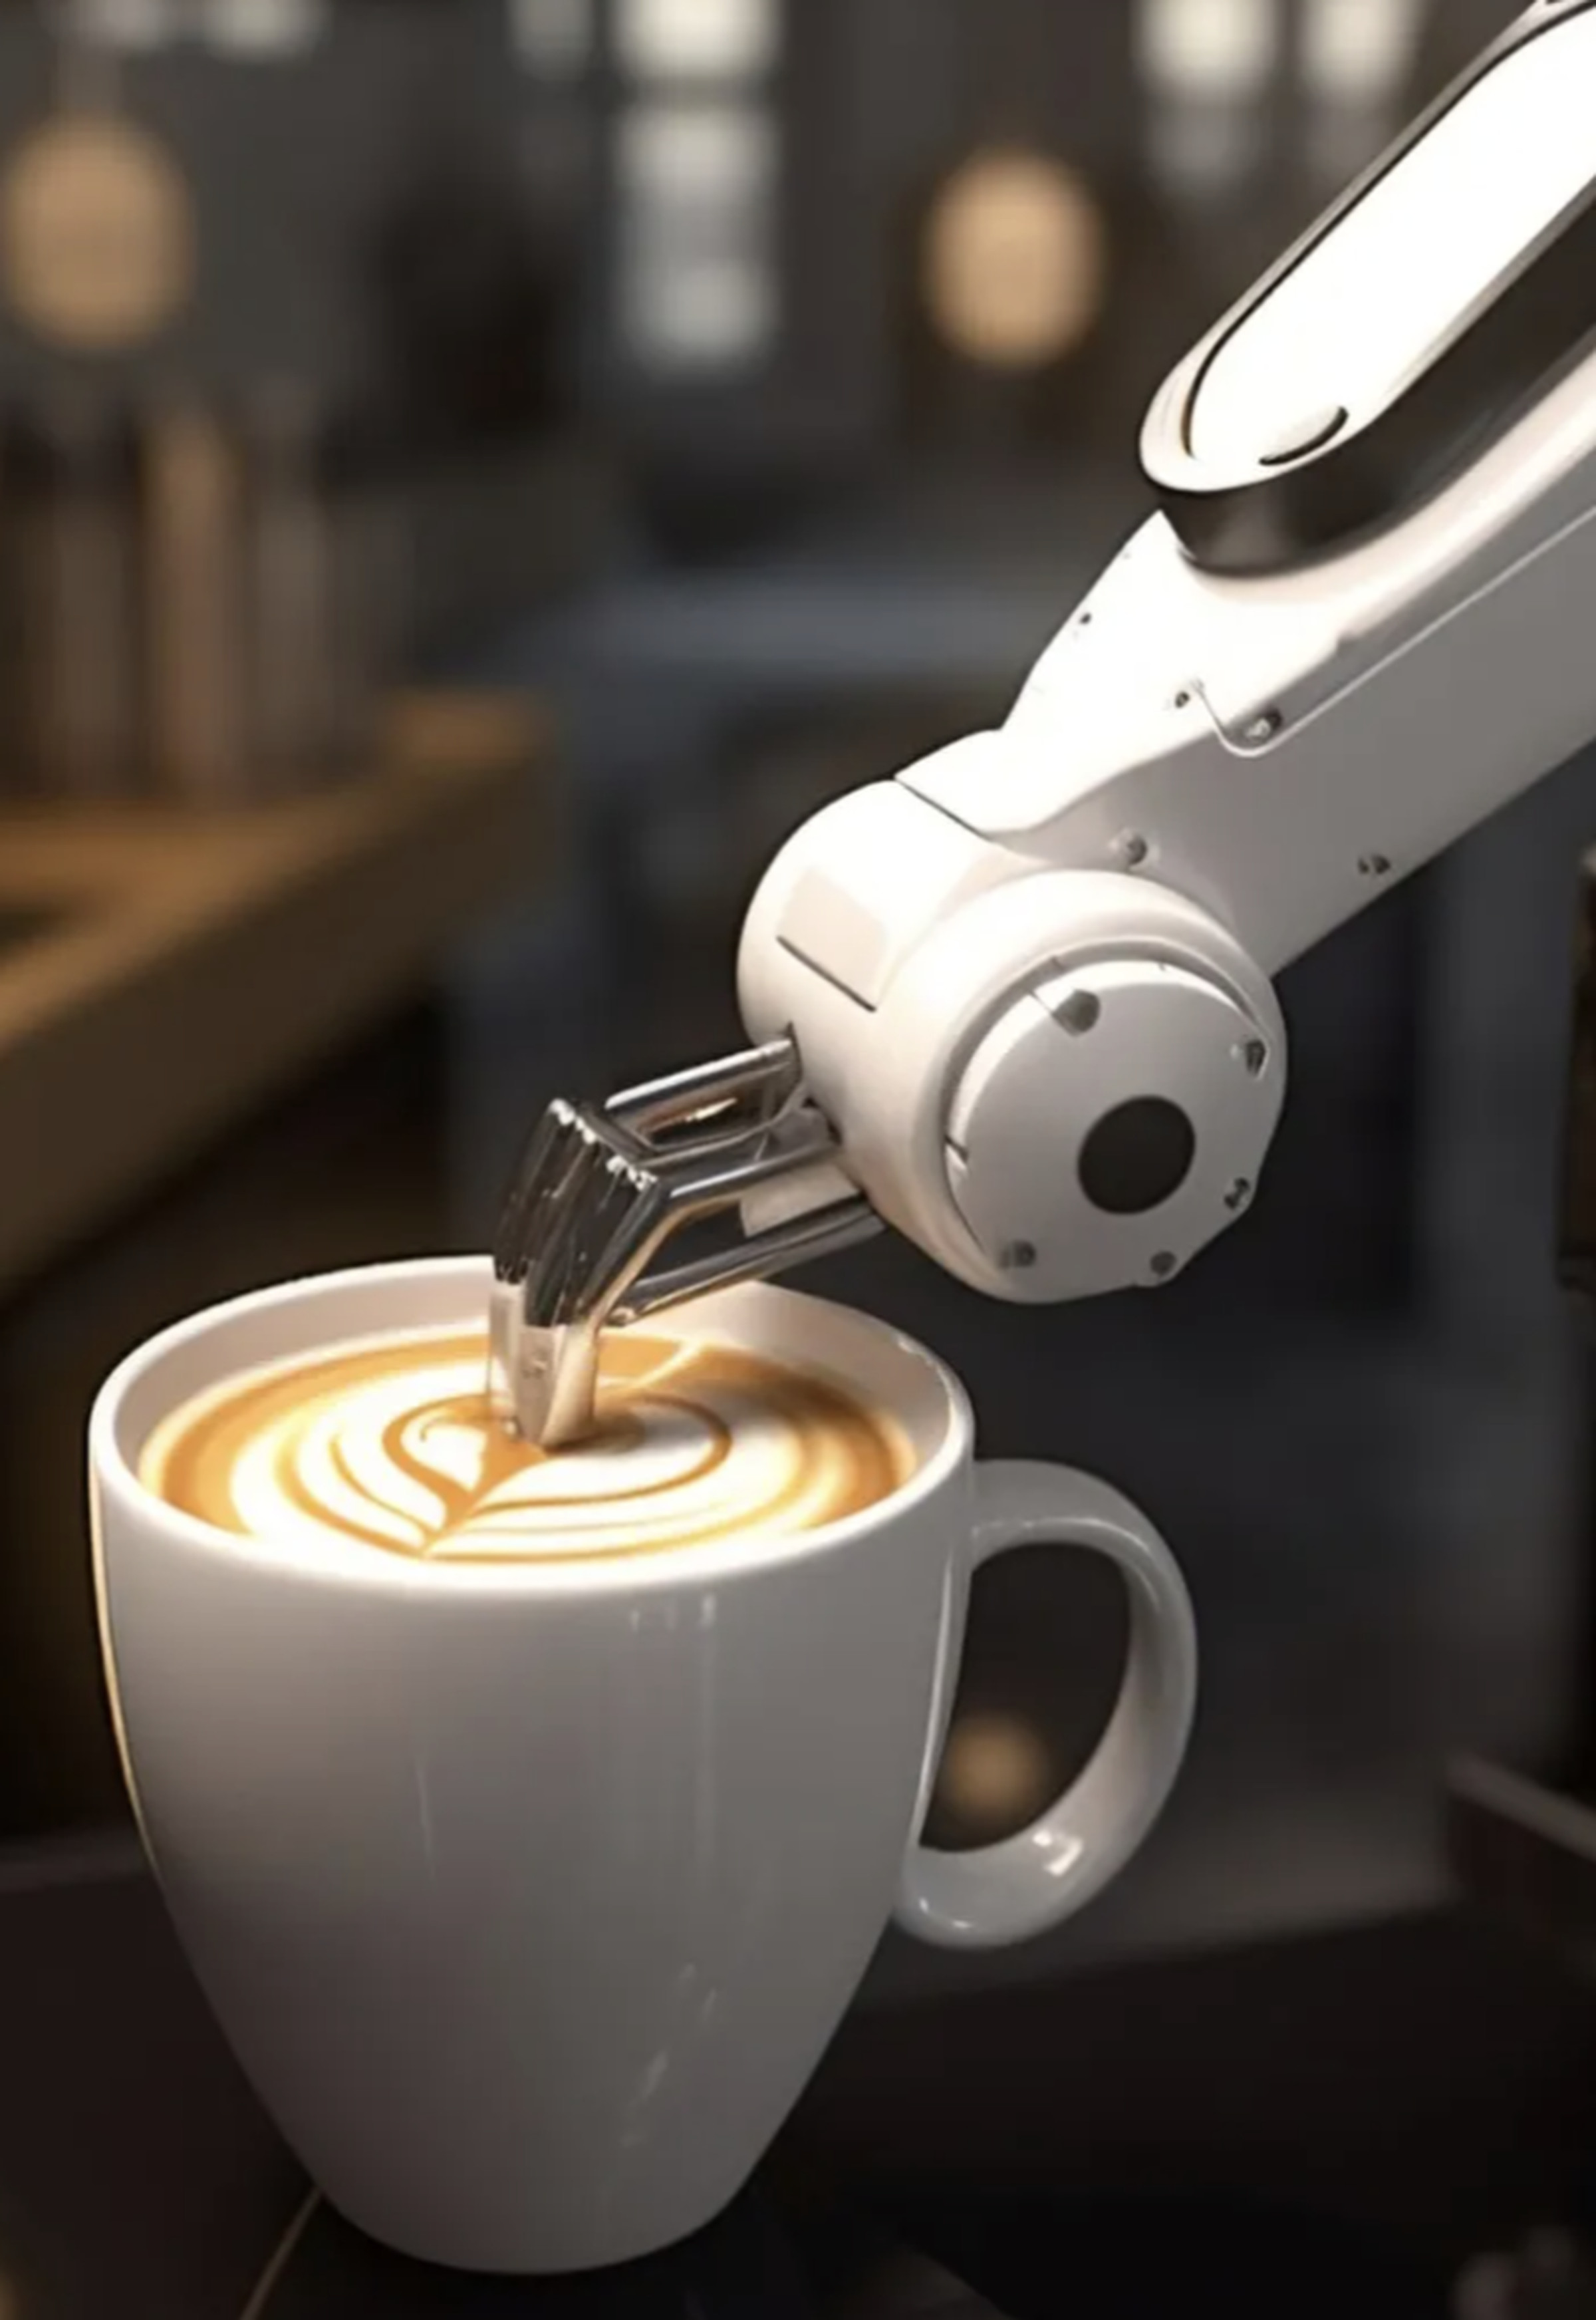 A dispute of a robotic arm dipping its tip into a latte.